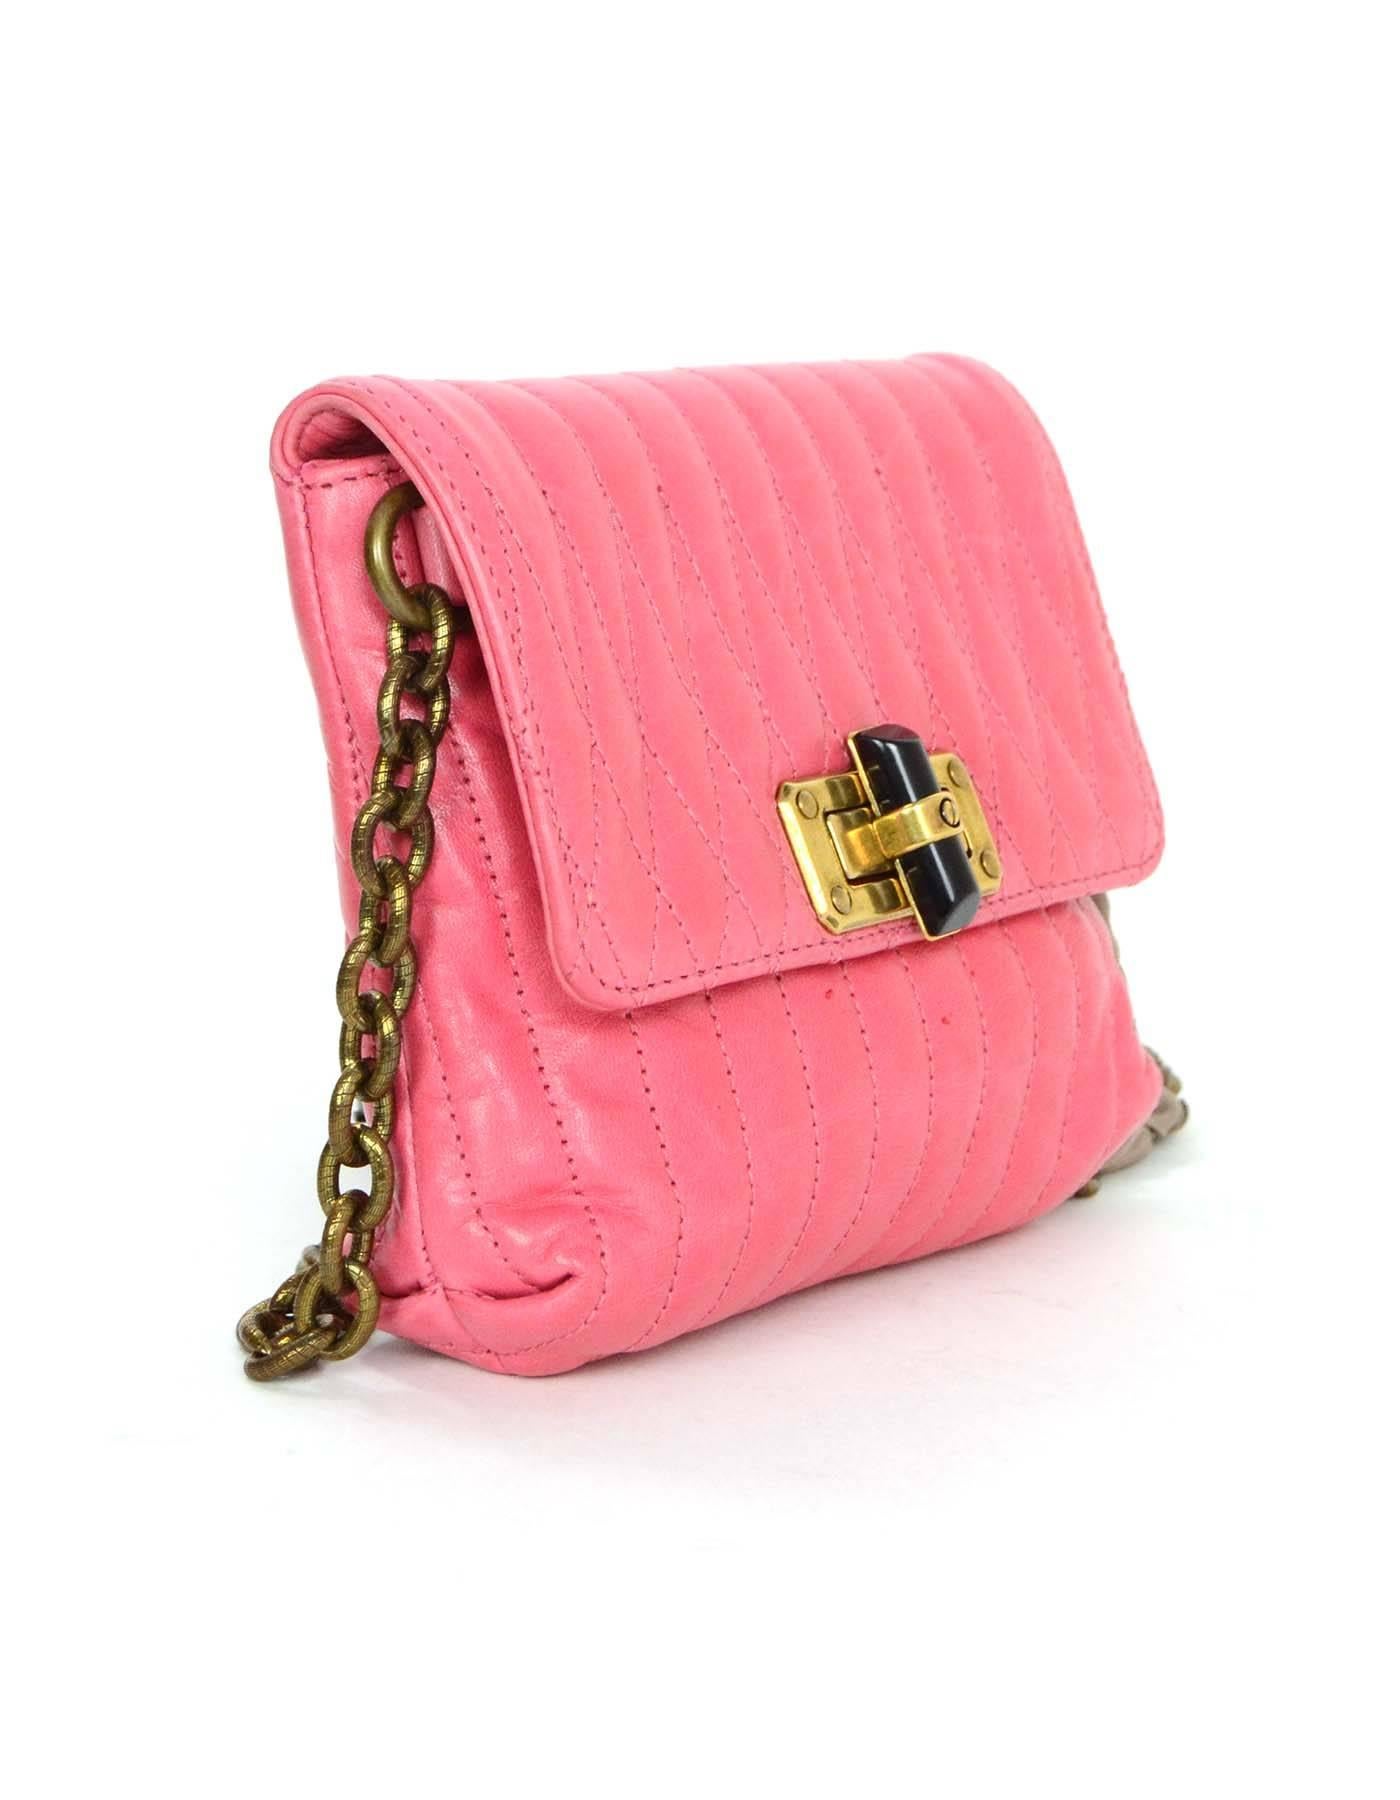 Lanvin Pink Leather Happy Crossbody Bag BHW In Excellent Condition In New York, NY